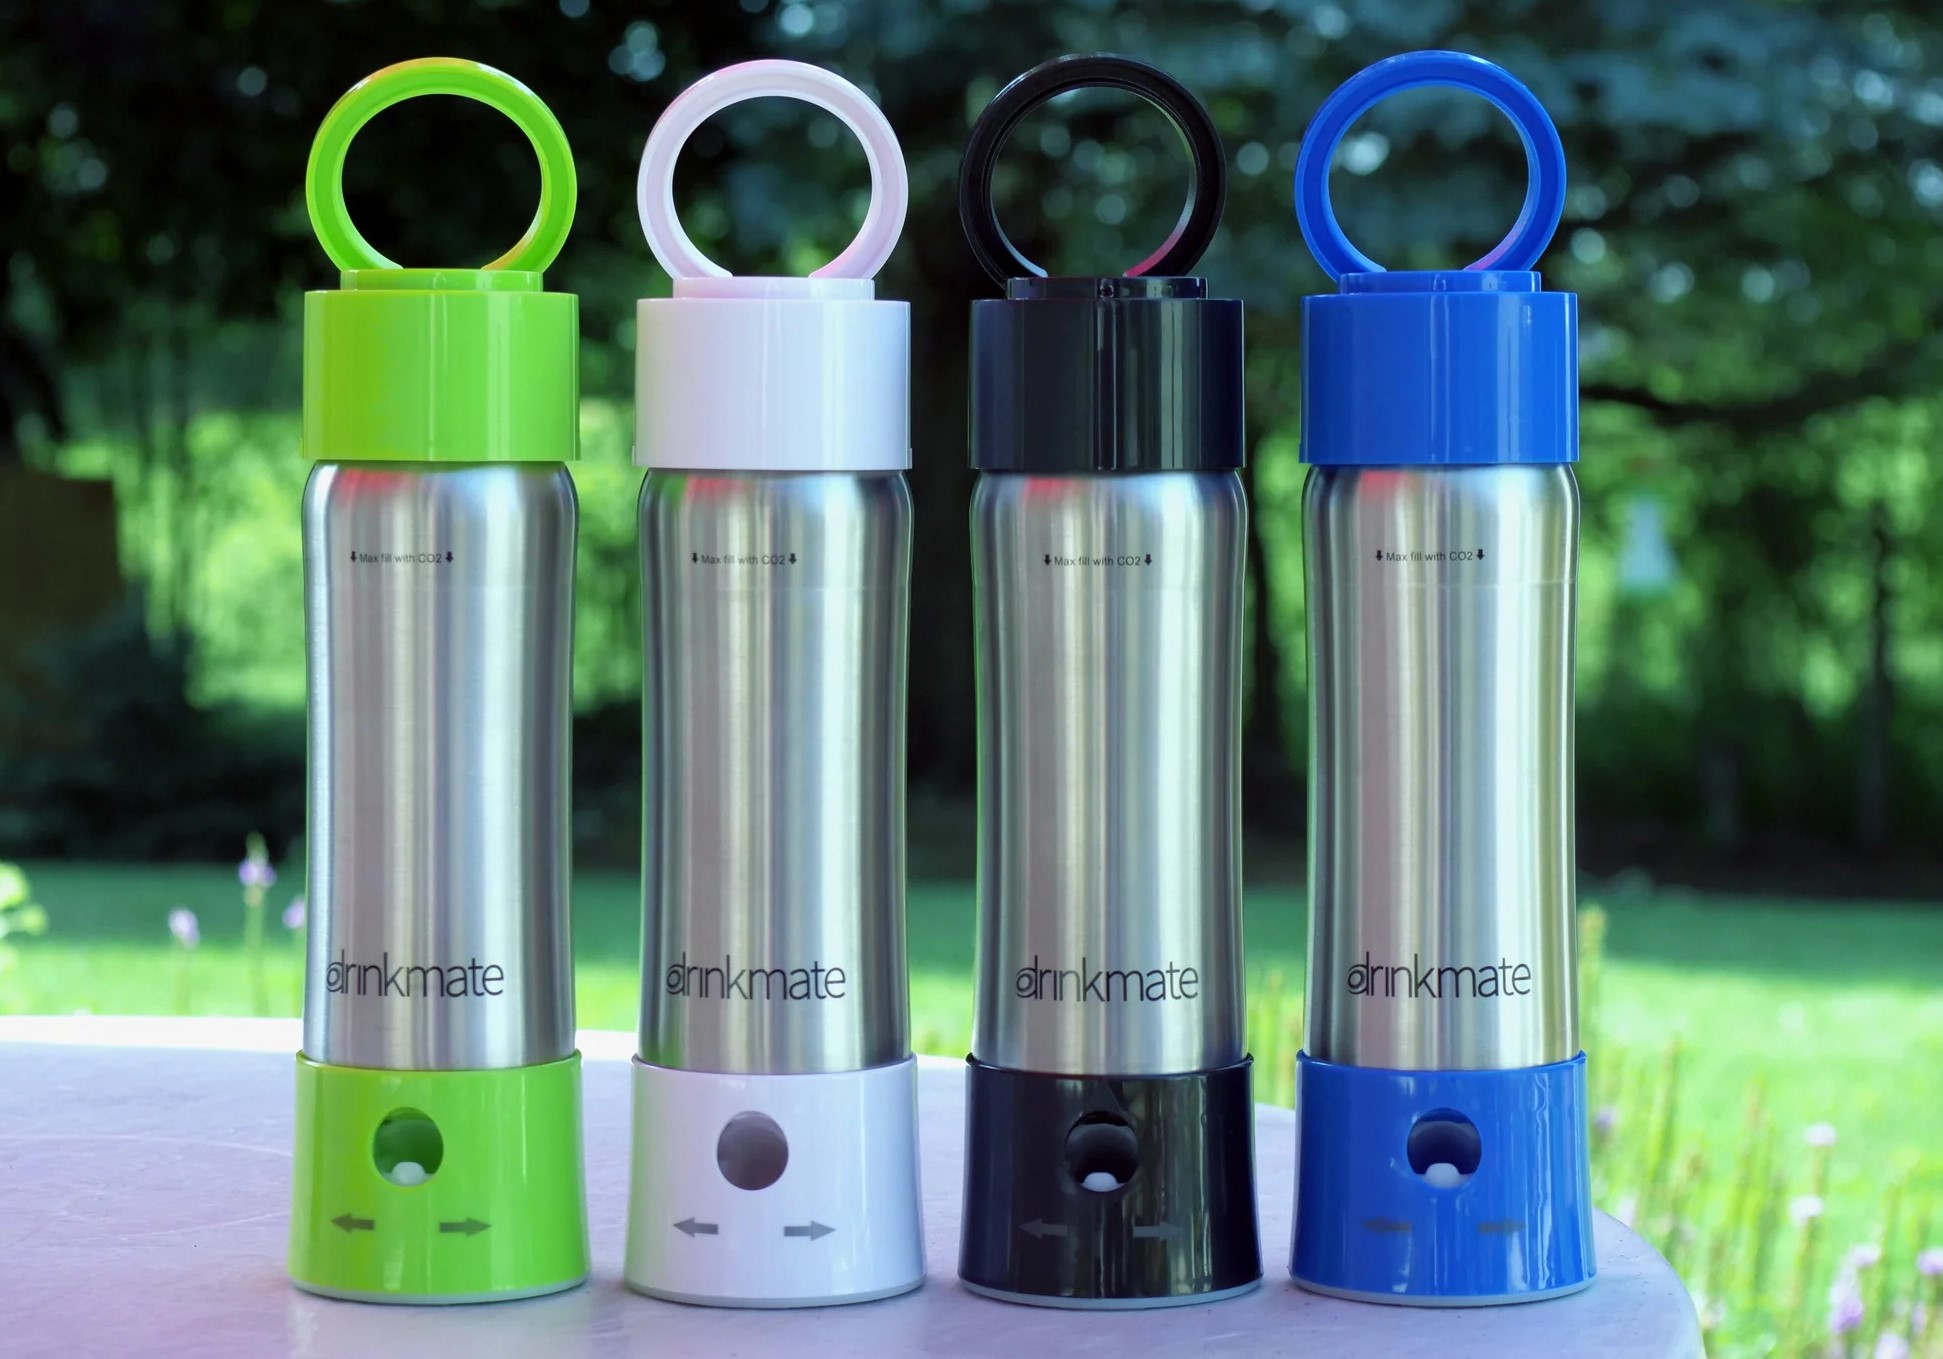 DrinkMate InstaFizz: This Waterbottle Carbonates Any Liquid